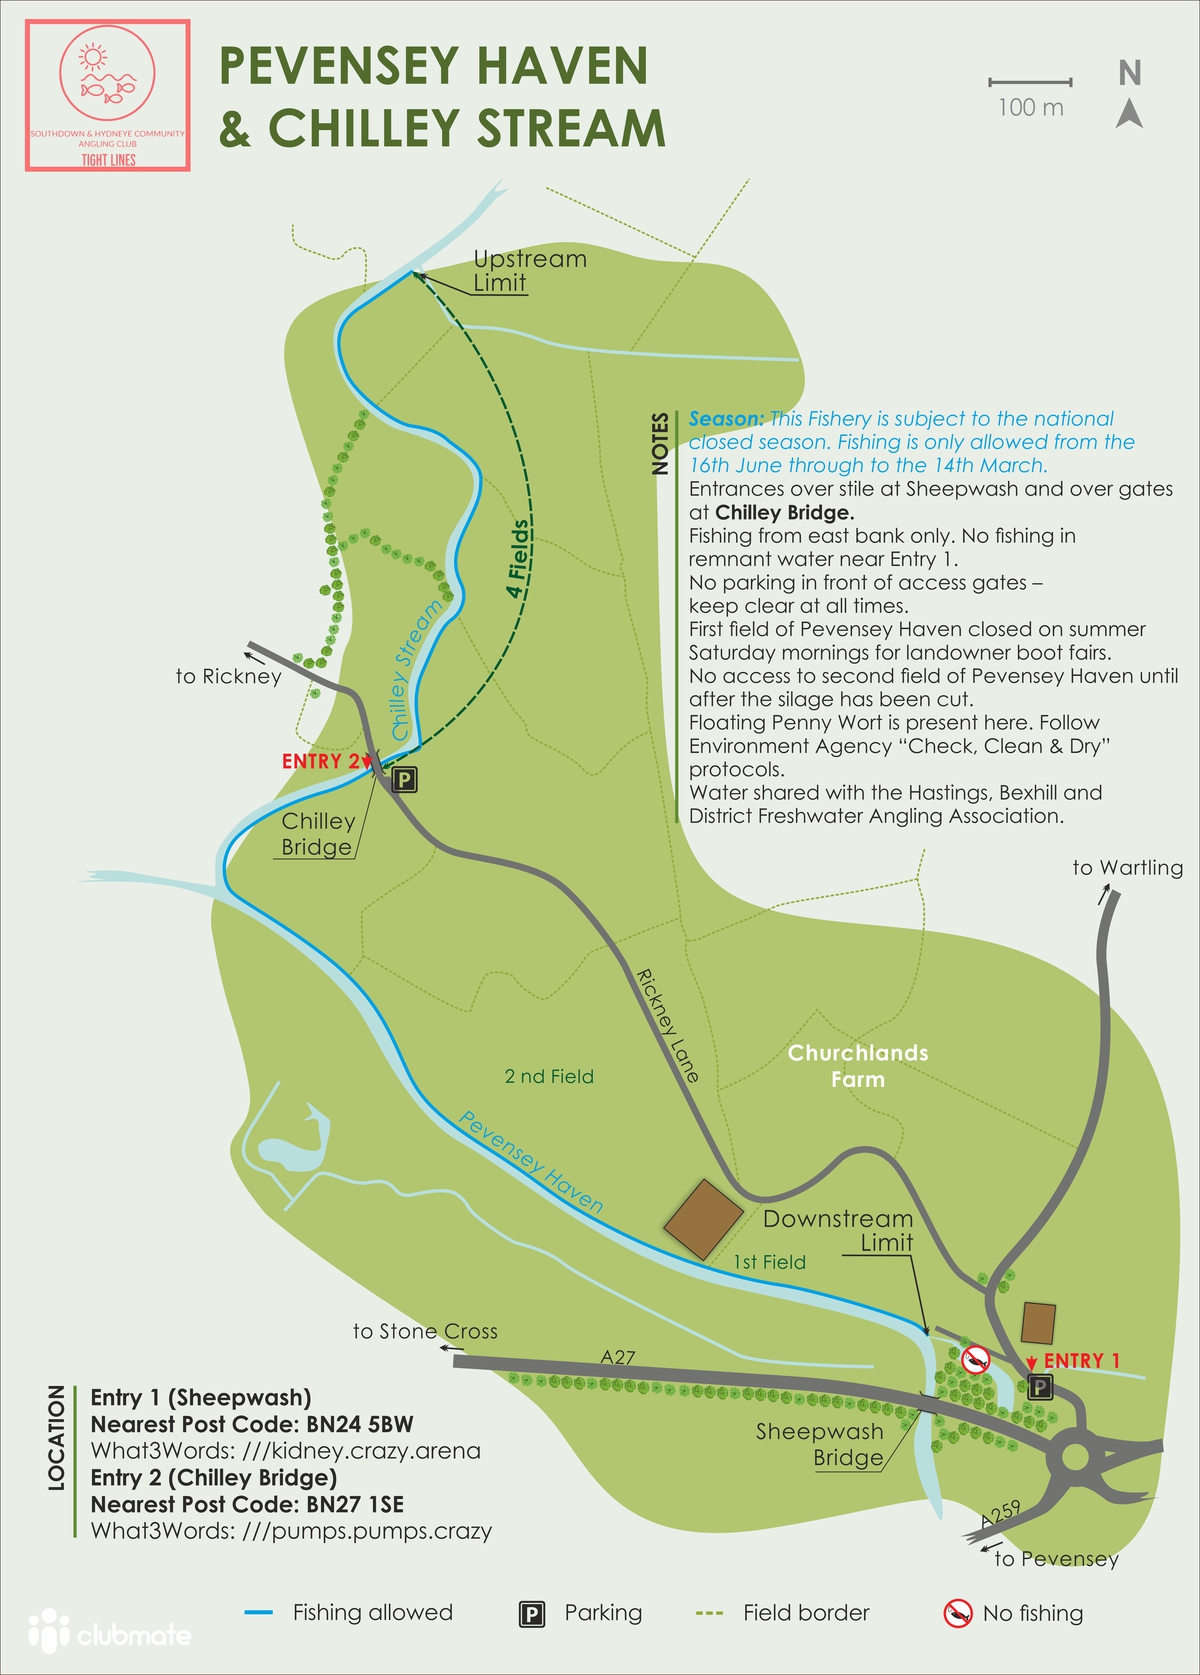 SAHCAC_-_Pevensey_Haven_and_Chilley_Stream_v2